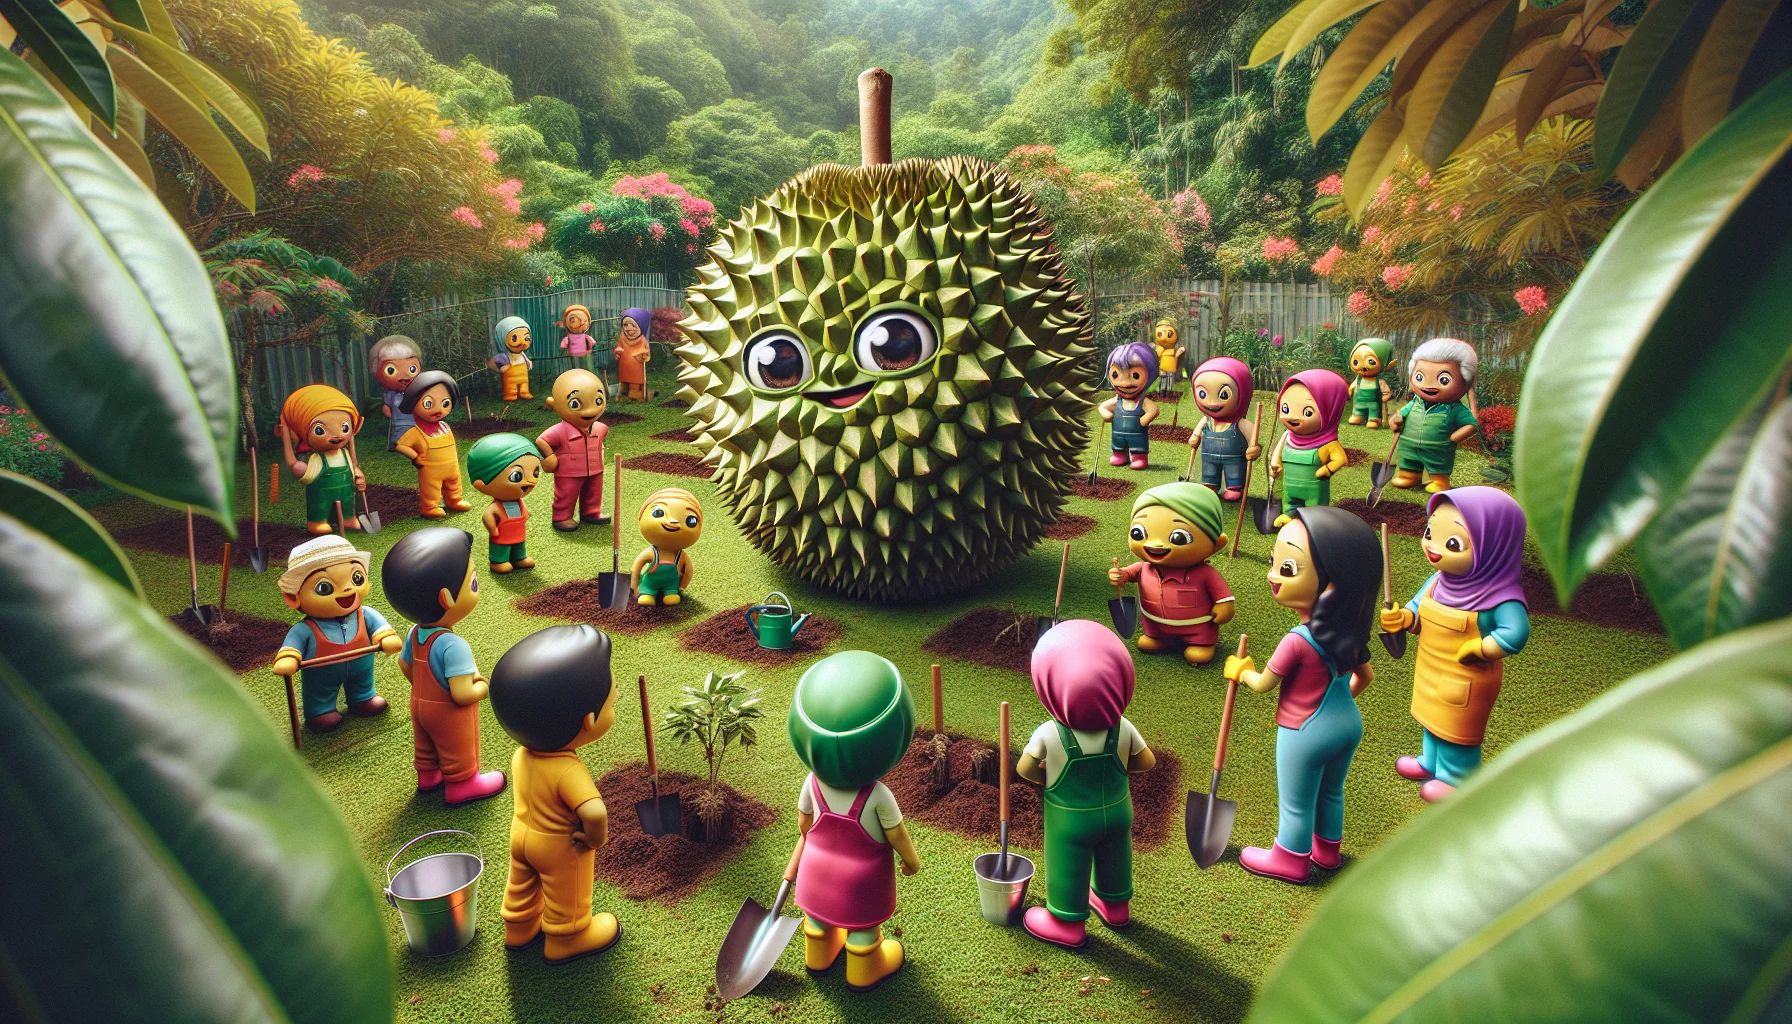 Generate a vibrant image of a comical scenario situated in a lush, well-maintained garden. The centerpiece is the Durian, the national fruit known for its distinct aroma and thorny exterior. This fruit is anthropomorphized, with expressive eyes and a friendly smile, inviting all passersby to partake in the gardening activities. The scene is filled with other characters of various descents and genders, from children to adults, all participating in gardening while wearing bright-colored gardening outfits and gloves, curiously eyeing the Durian. Their reactions range from amusement to surprise, creating an intriguing narrative about gardening.